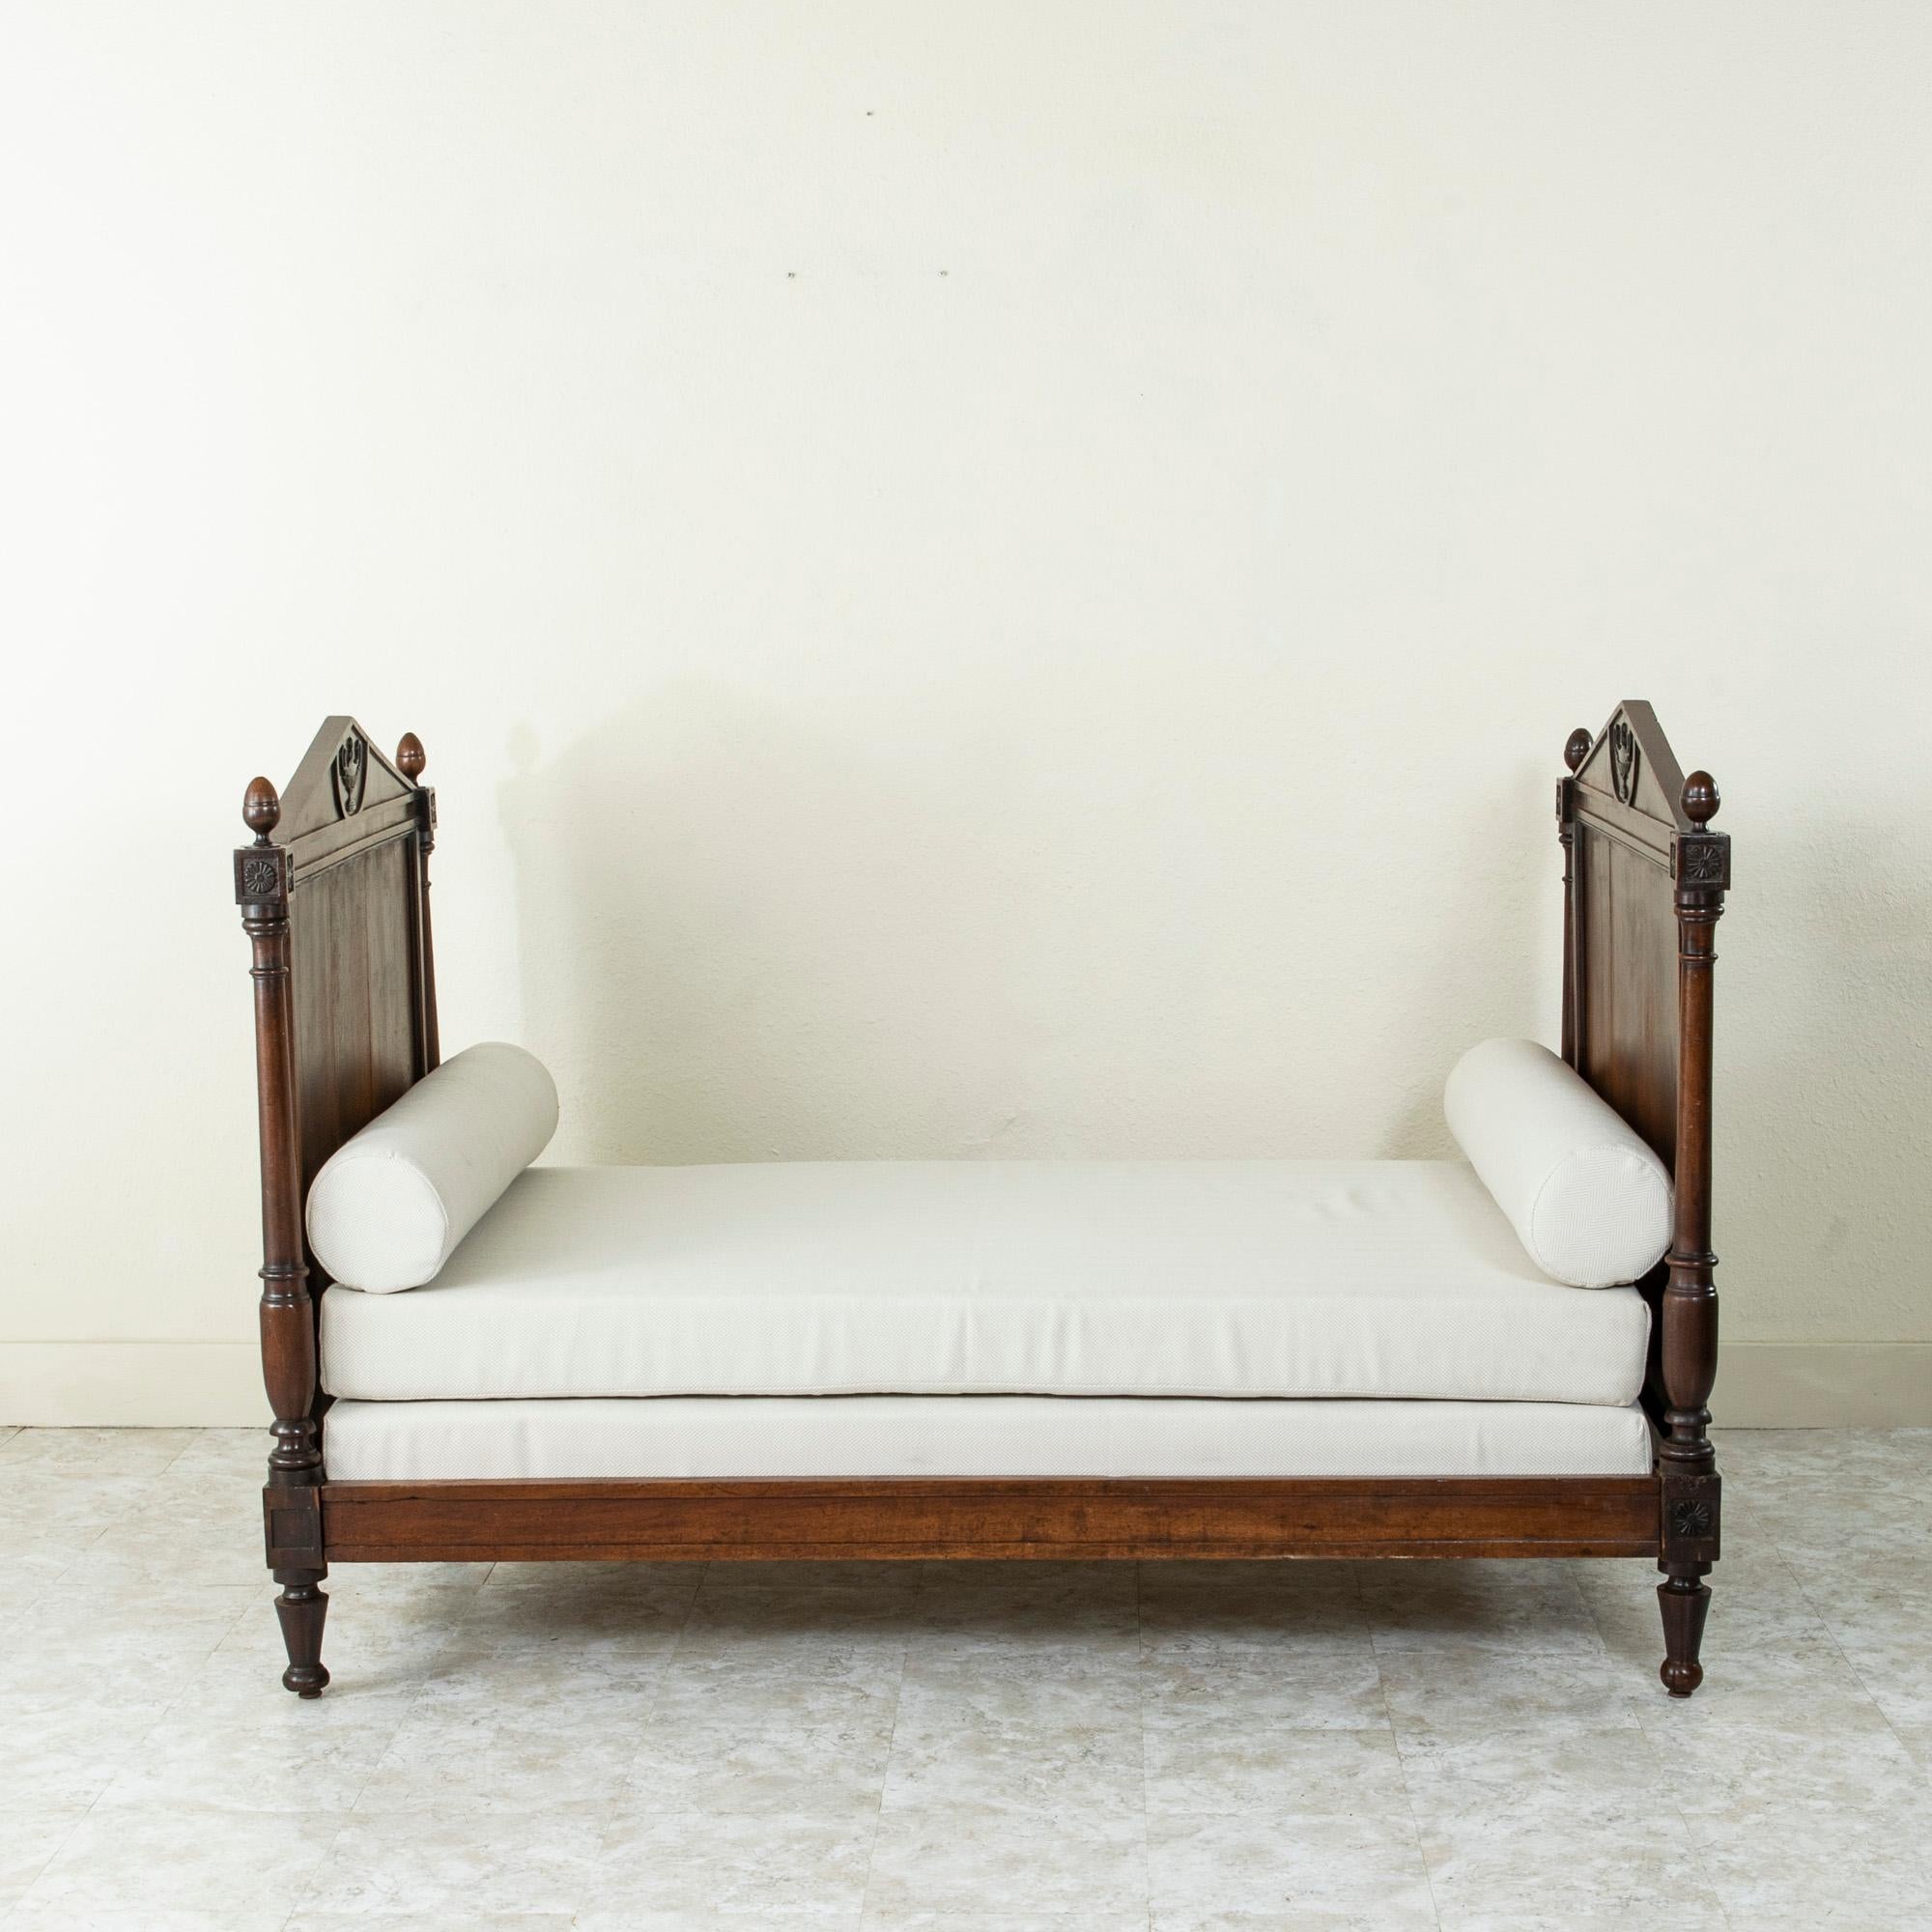 Late 18th Century French Directoire Period Hand Carved Walnut Daybed In Good Condition For Sale In Fayetteville, AR